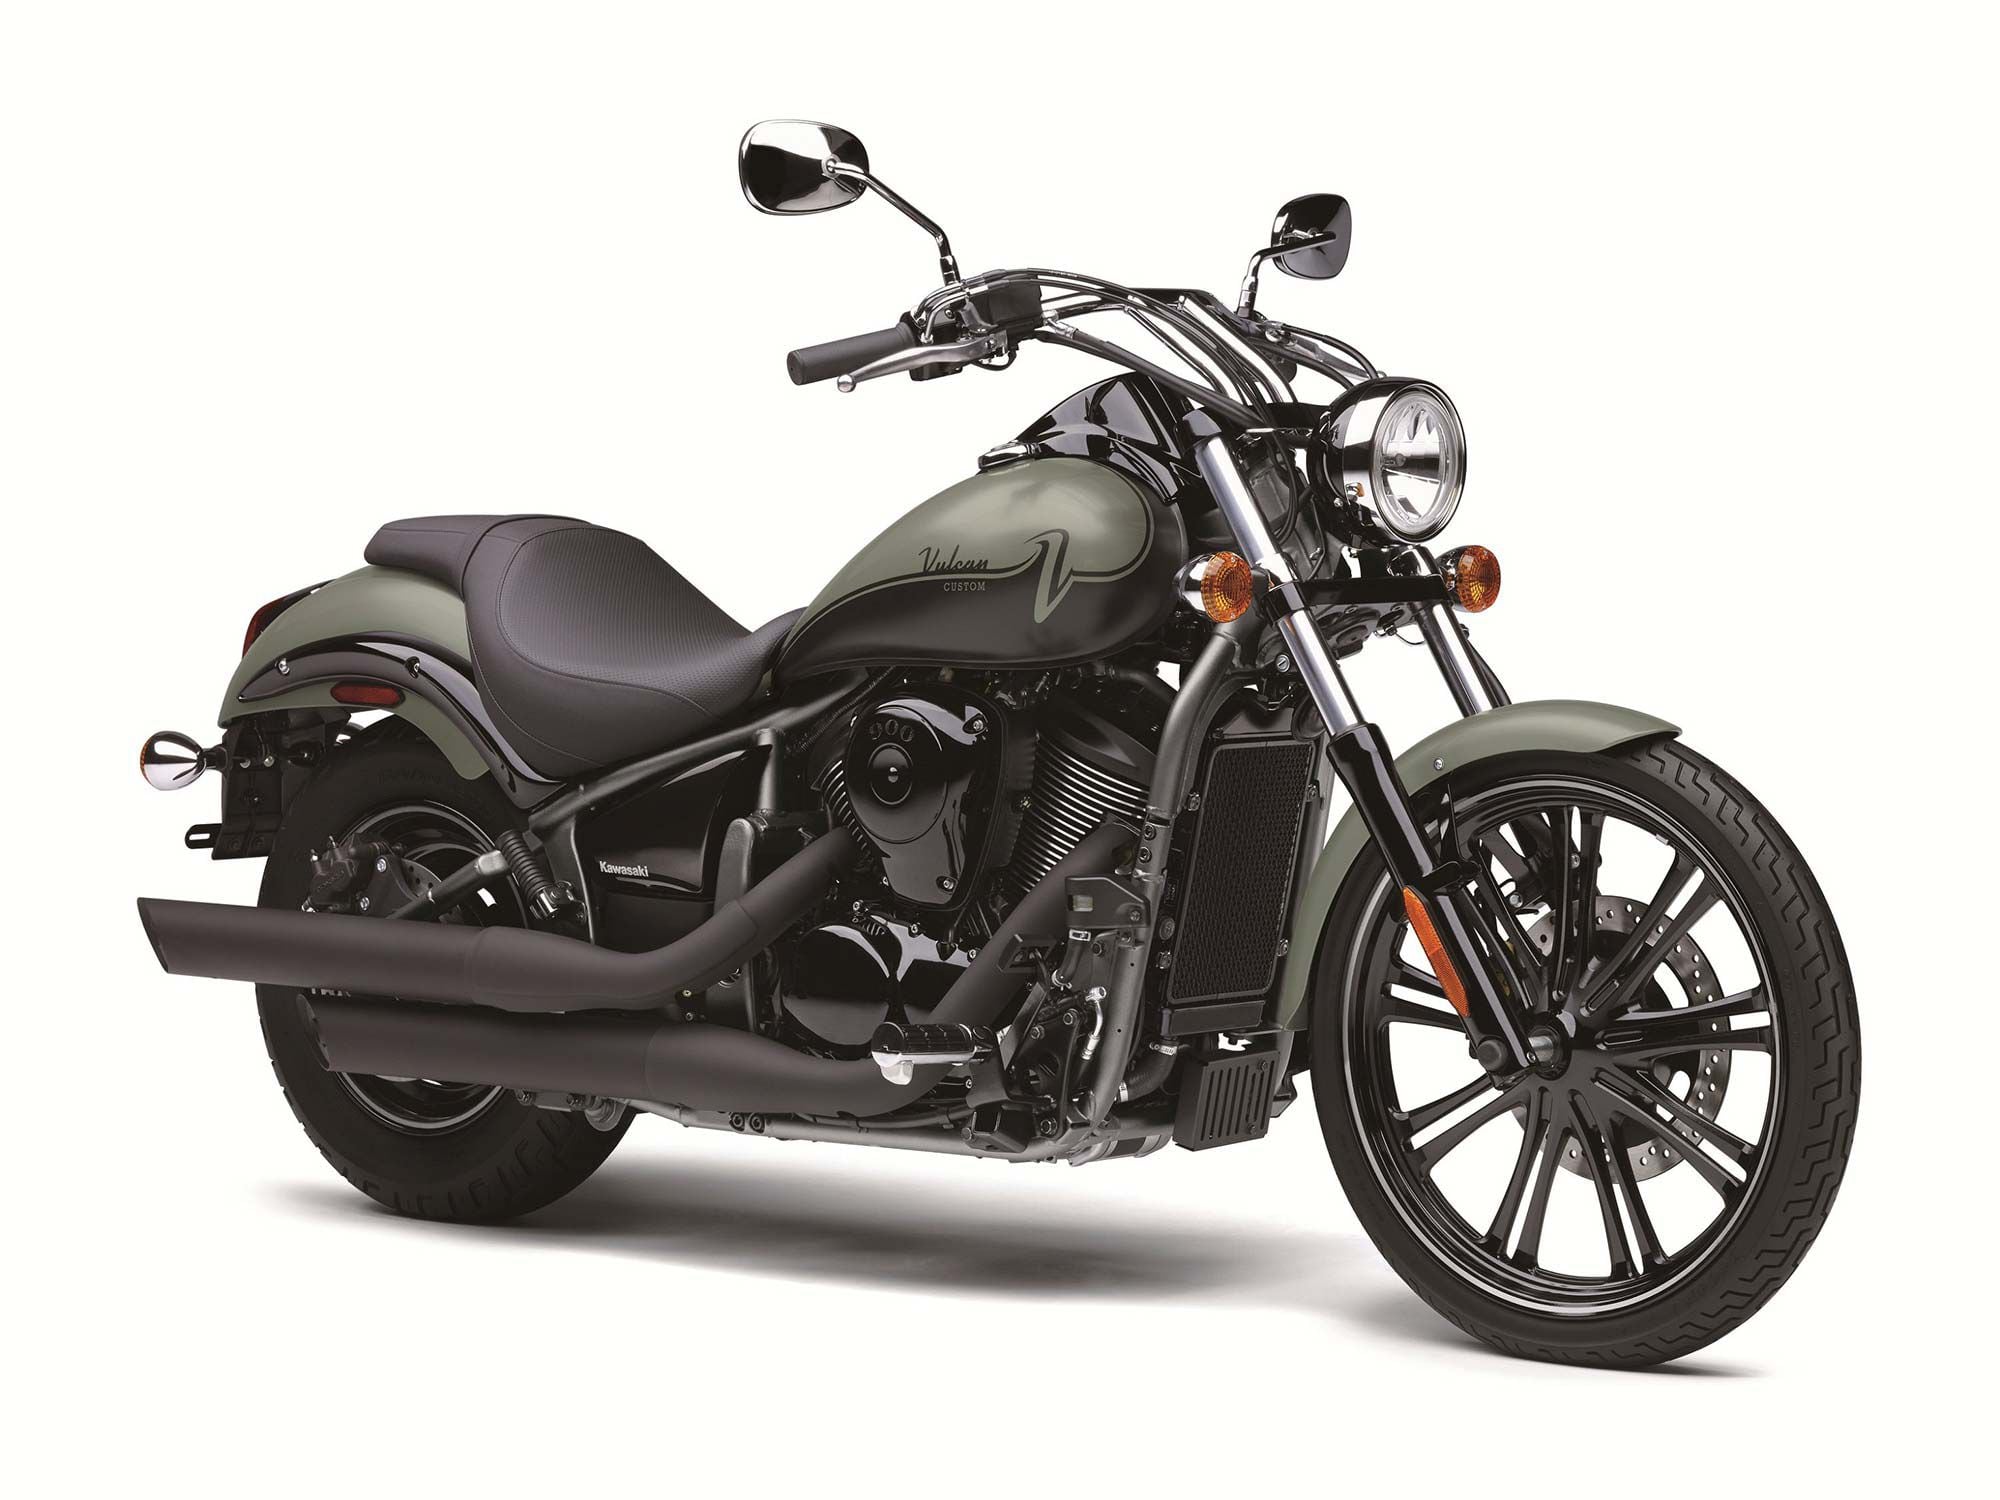 In Custom form, the Vulcan 900 retains its streetwise attitude, but for 2023, gets a new Sage Green paint job.